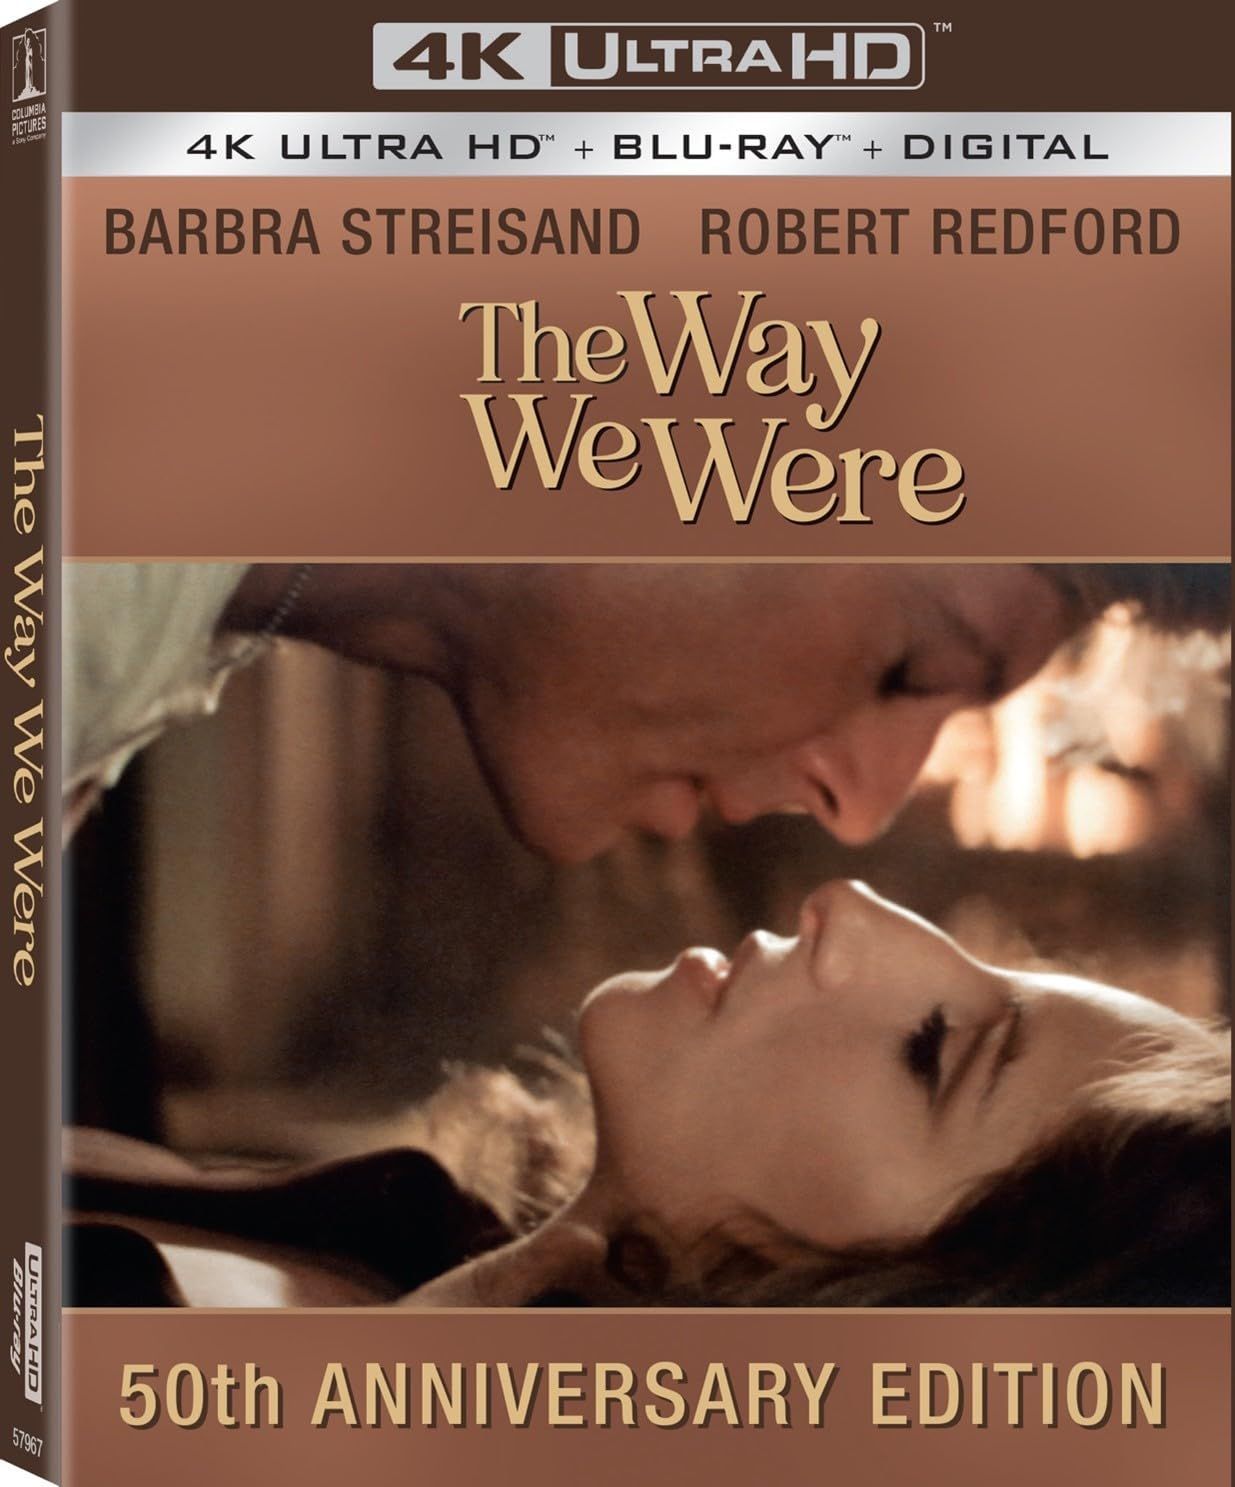 The Way We Were 4K disc cover, 50th Anniversary